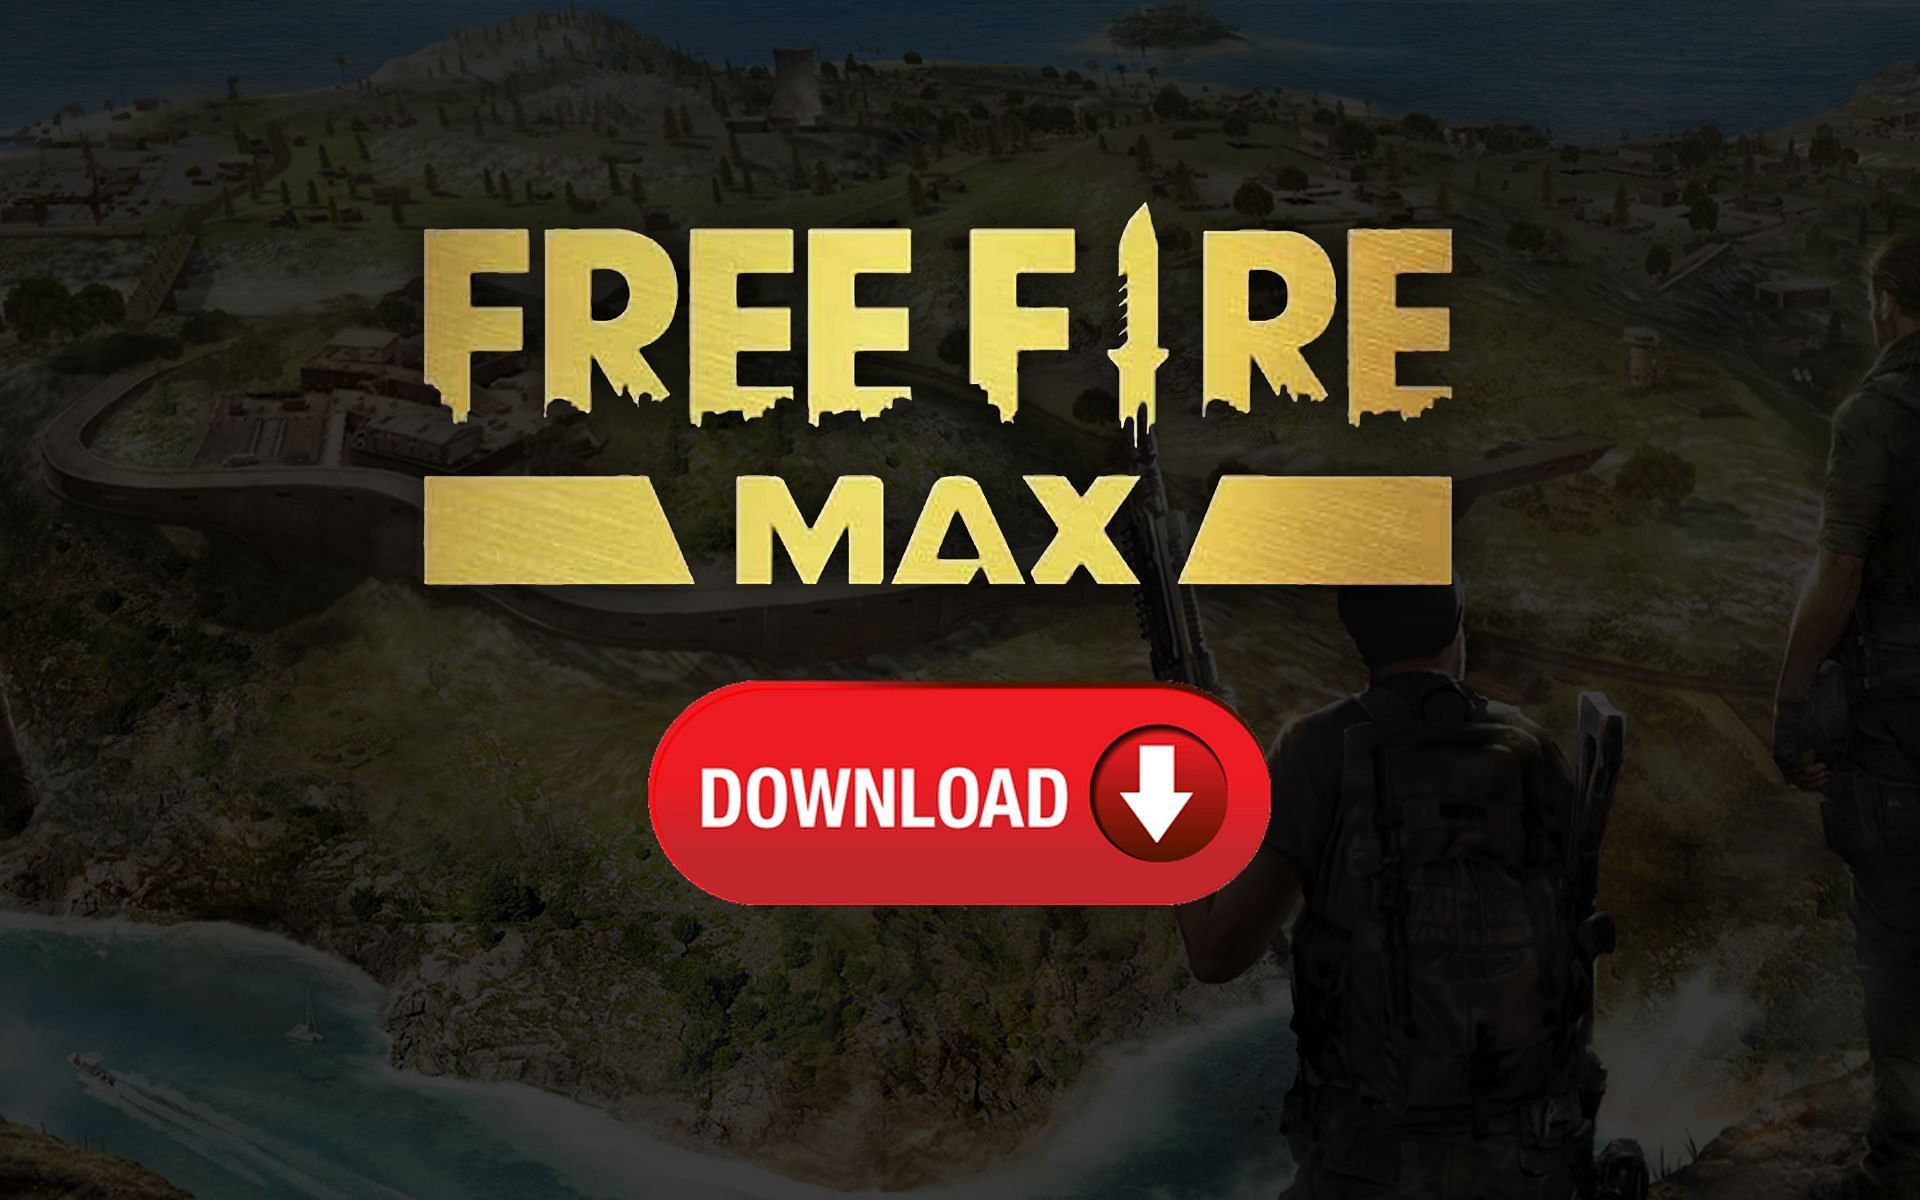 Play Garena Free Fire MAX on phone and PC in India; here is how to  download, check steps